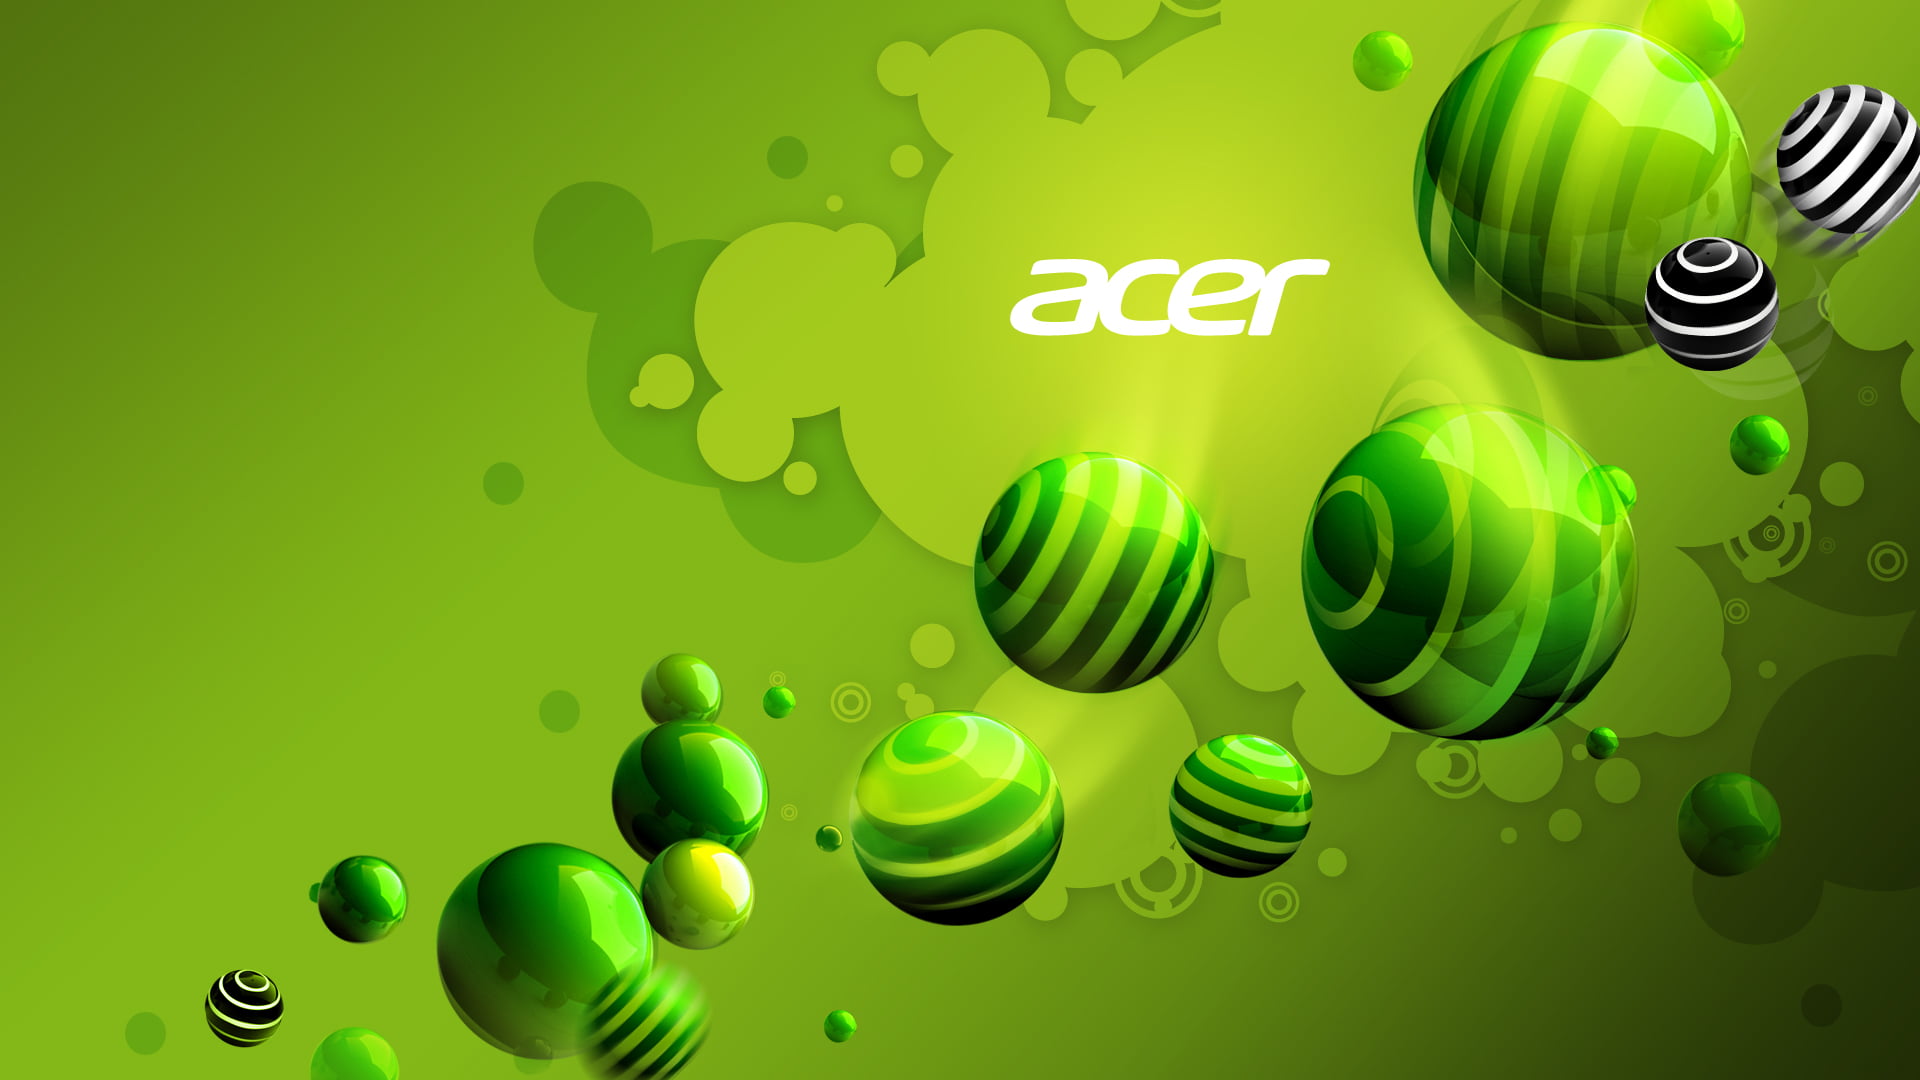 Acer logo, saver, Aspire, vector, illustration, backgrounds, abstract